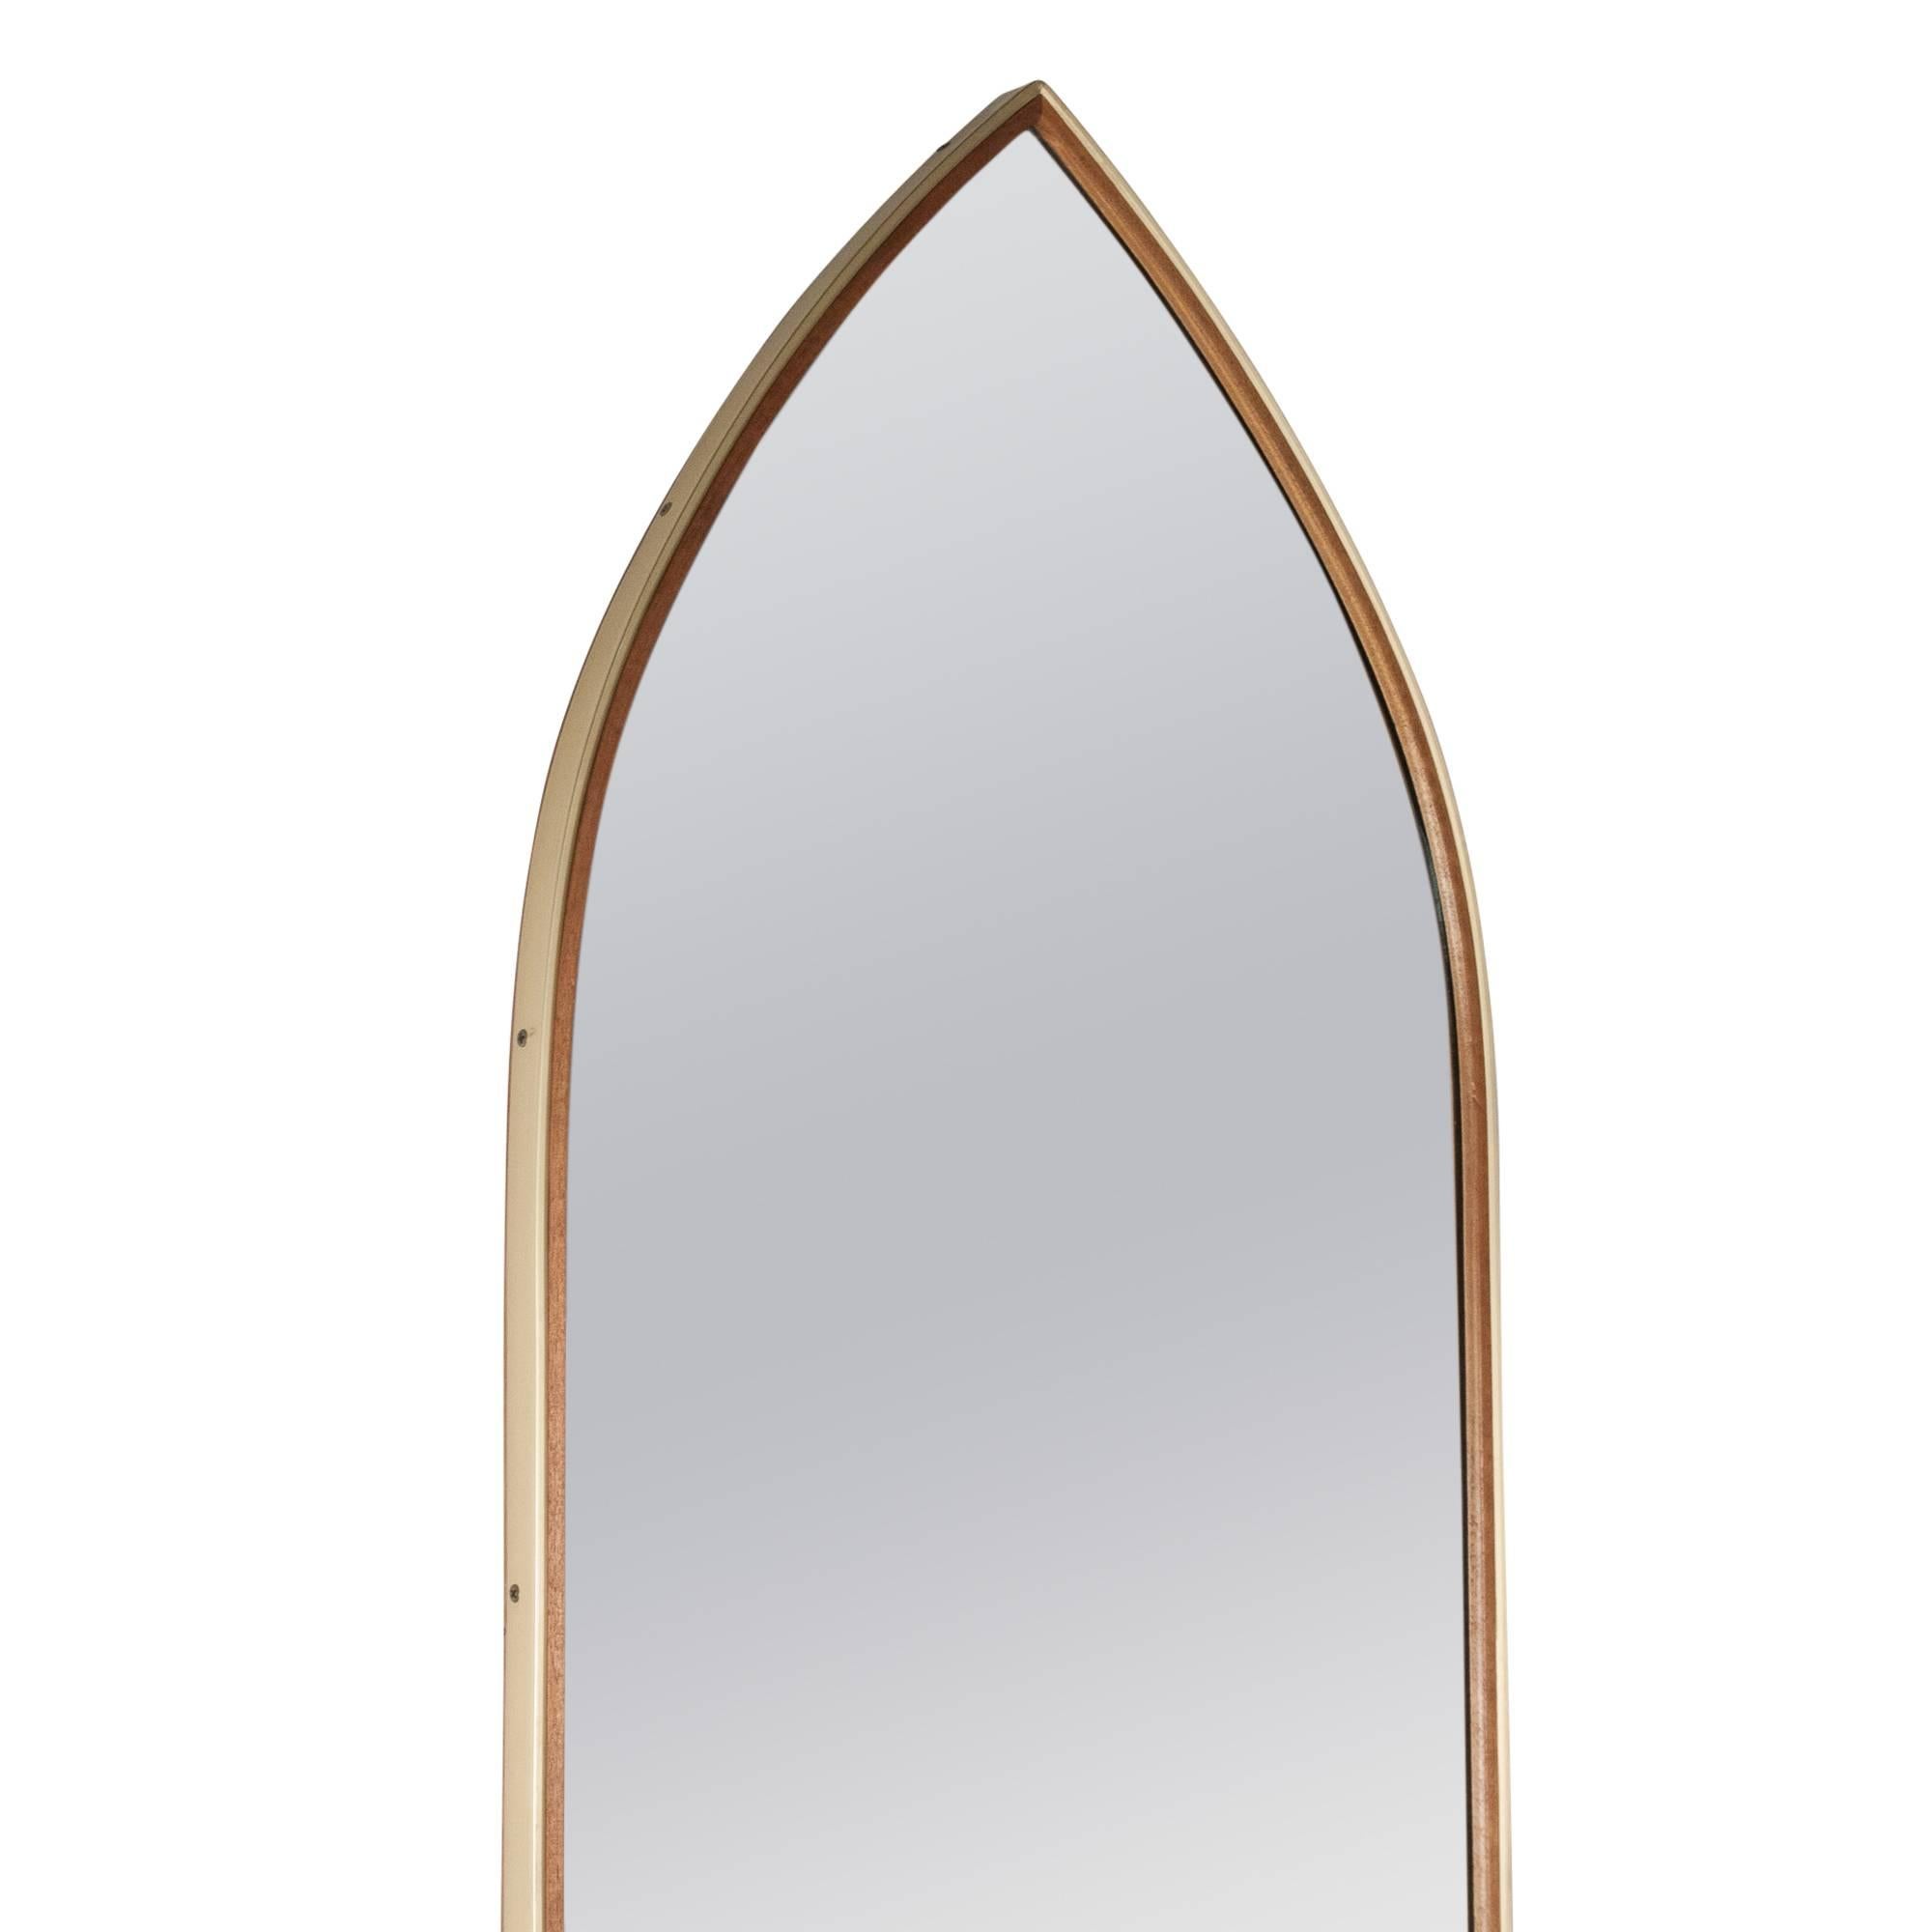 Danish Pair of Teak and Brass Frame Mirrors, 1950s For Sale